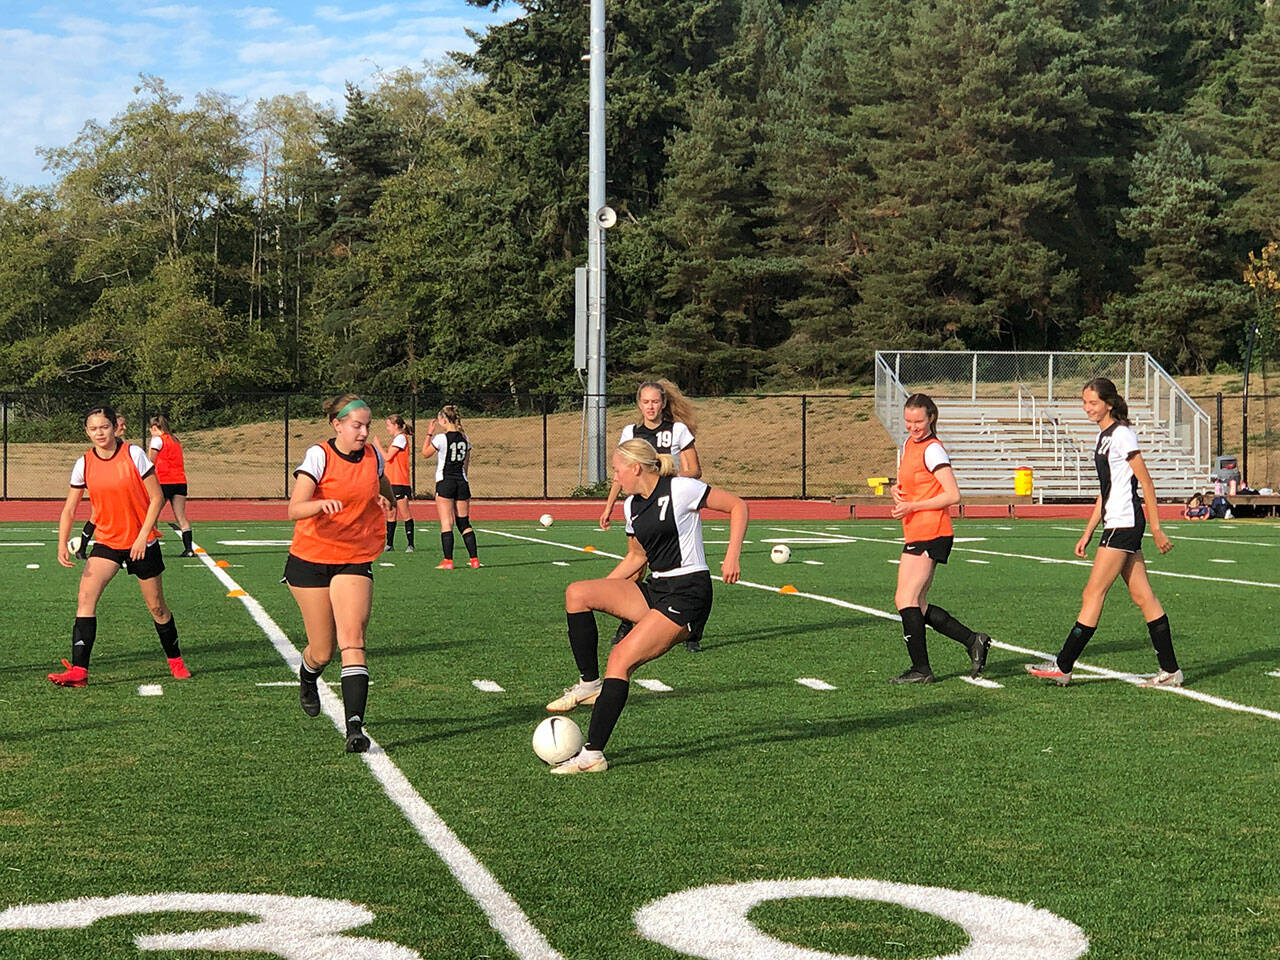 Jenni Wilke Photo
Vashon High School’s girls’ soccer team warmed up for their first home game on Sept. 13, coming off of back-to-back wins in their first two away games.